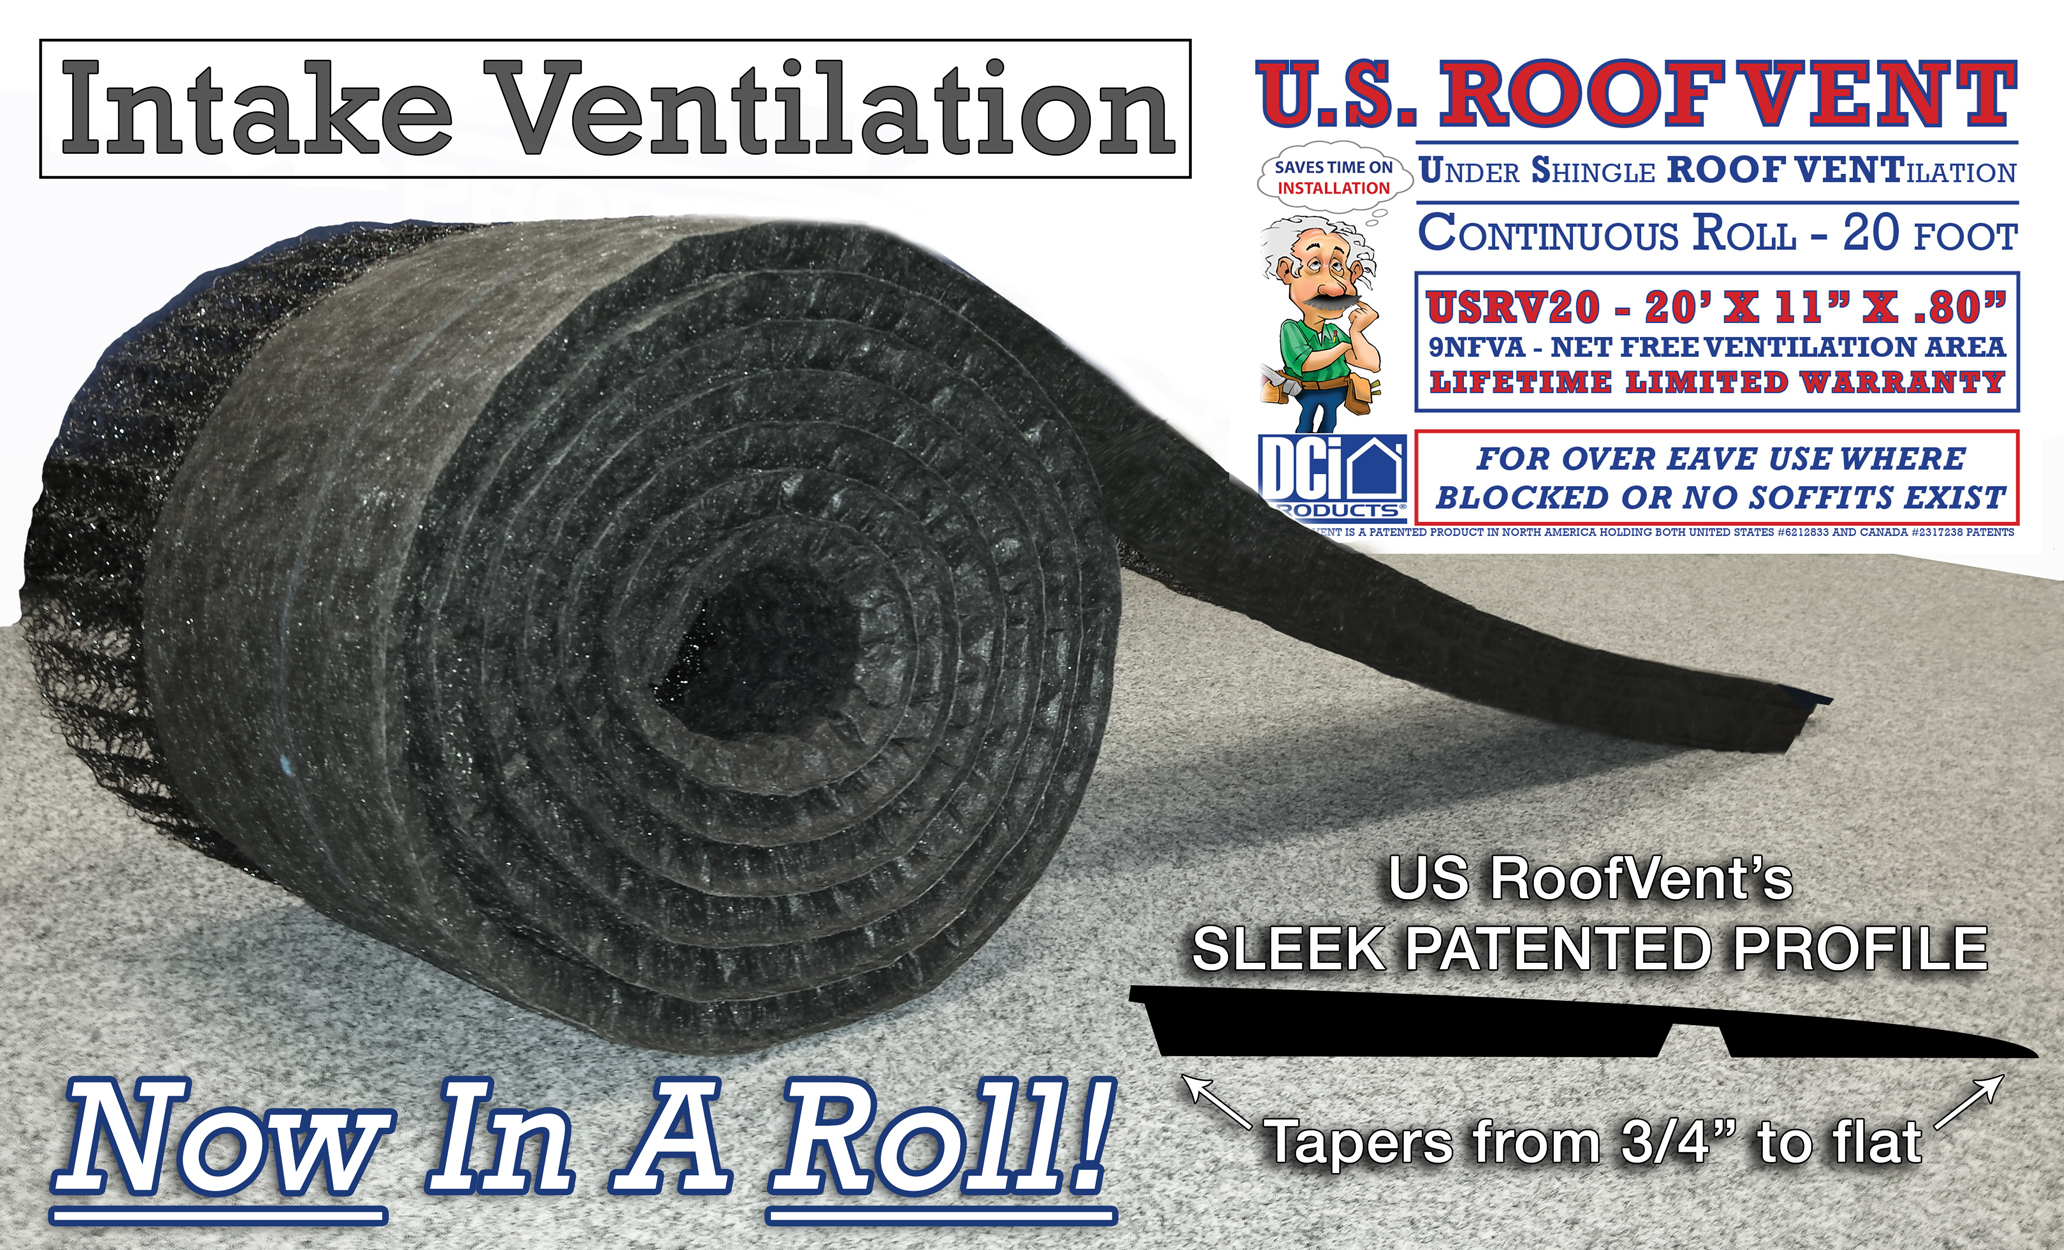 US RoofVent 20ft continuous roll attic ventilation